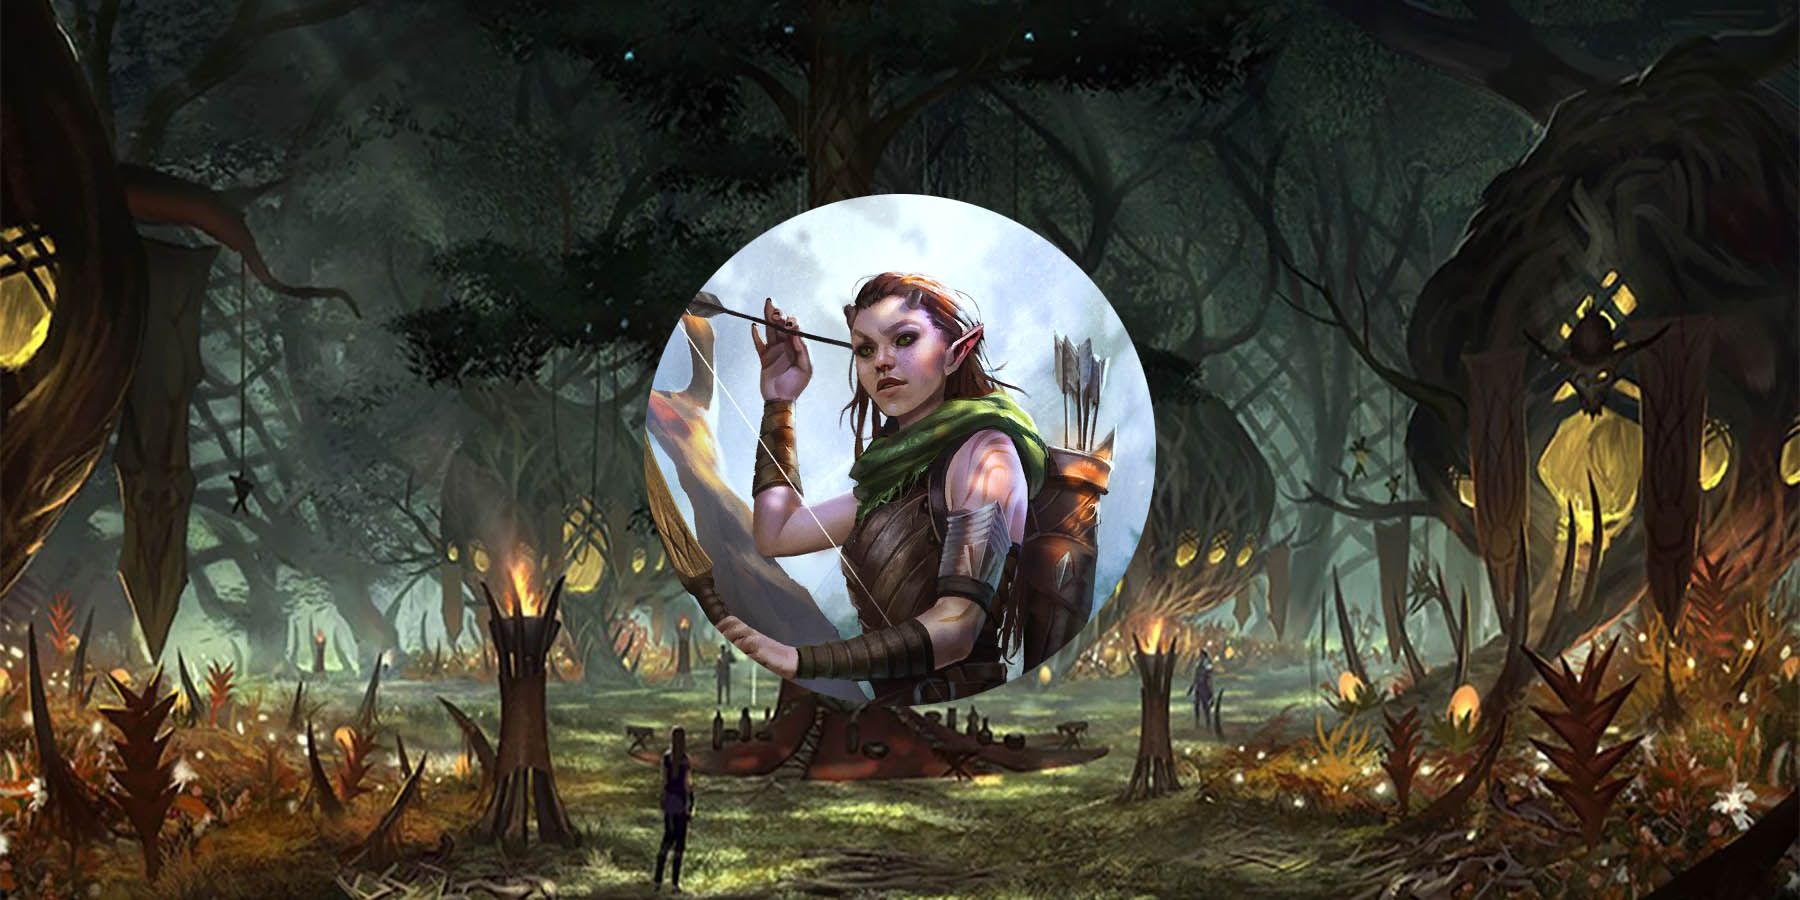 The Elder Scrolls The Green Pacts Impact on Wood Elf Culture Explained